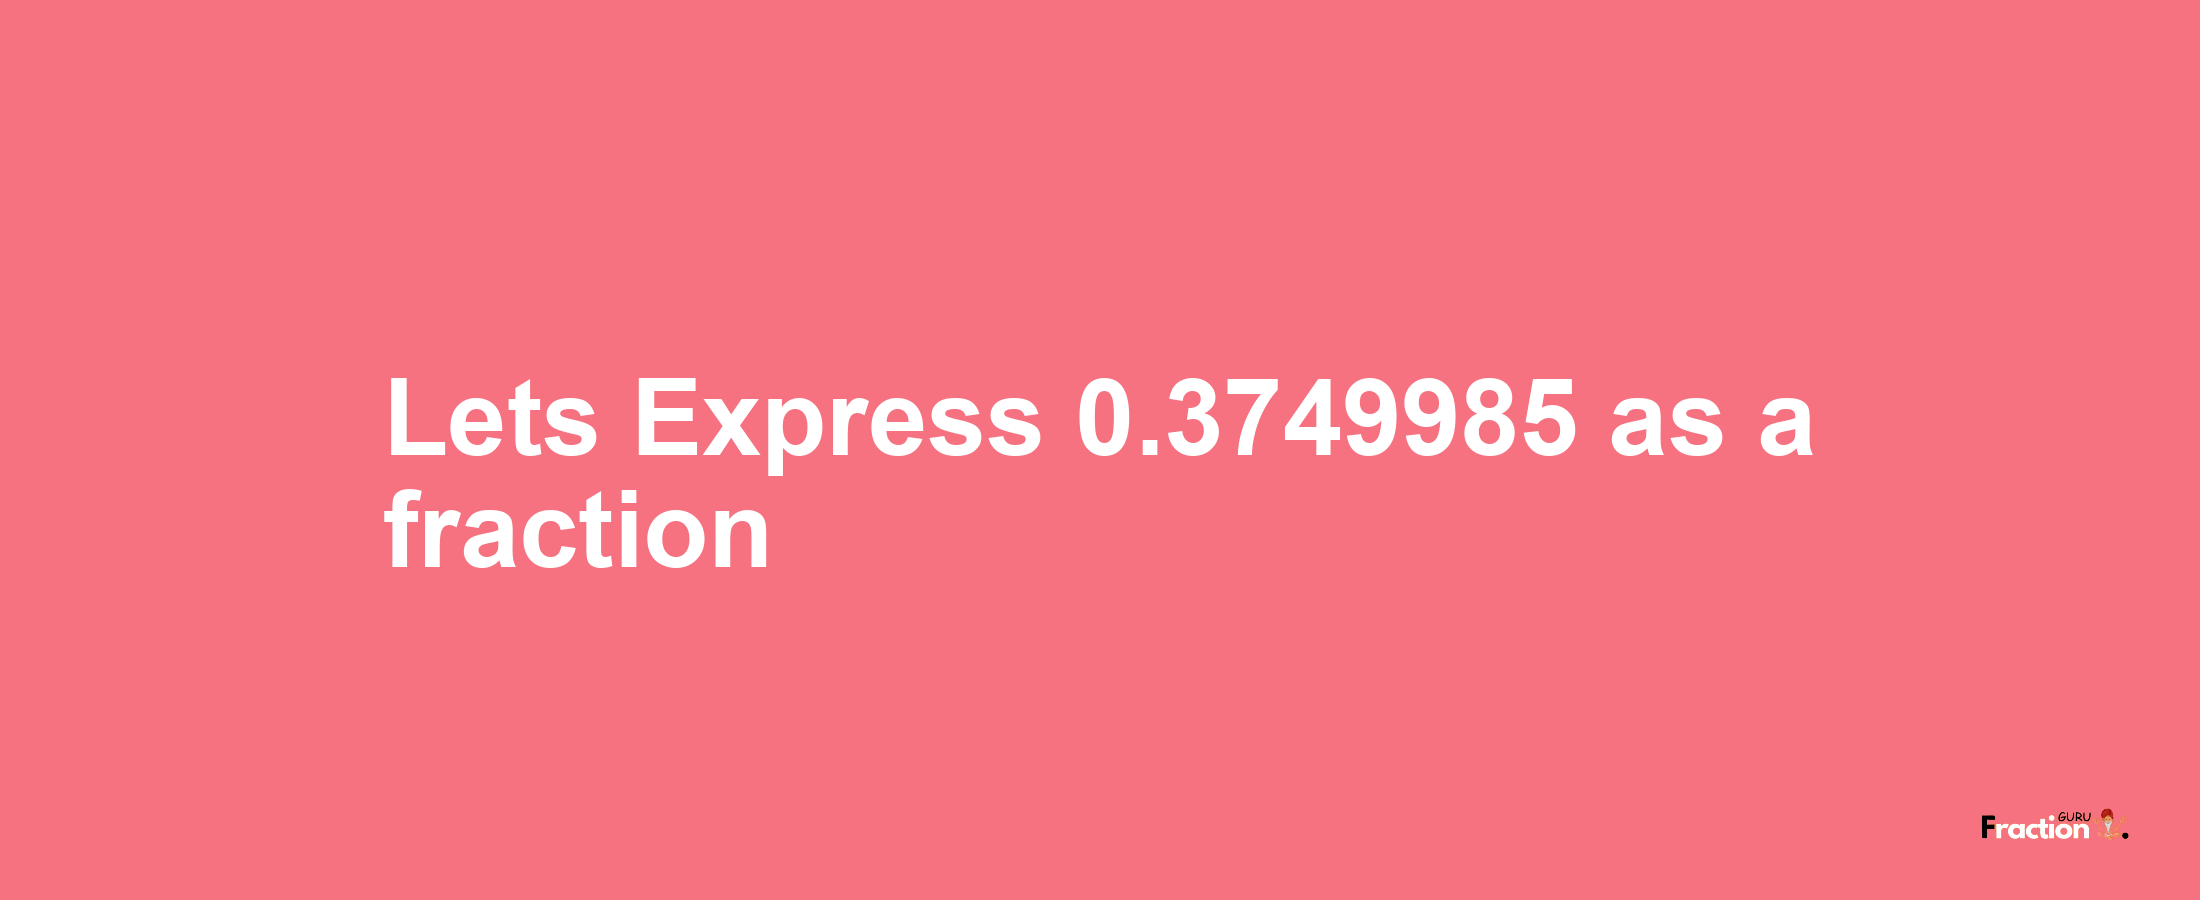 Lets Express 0.3749985 as afraction